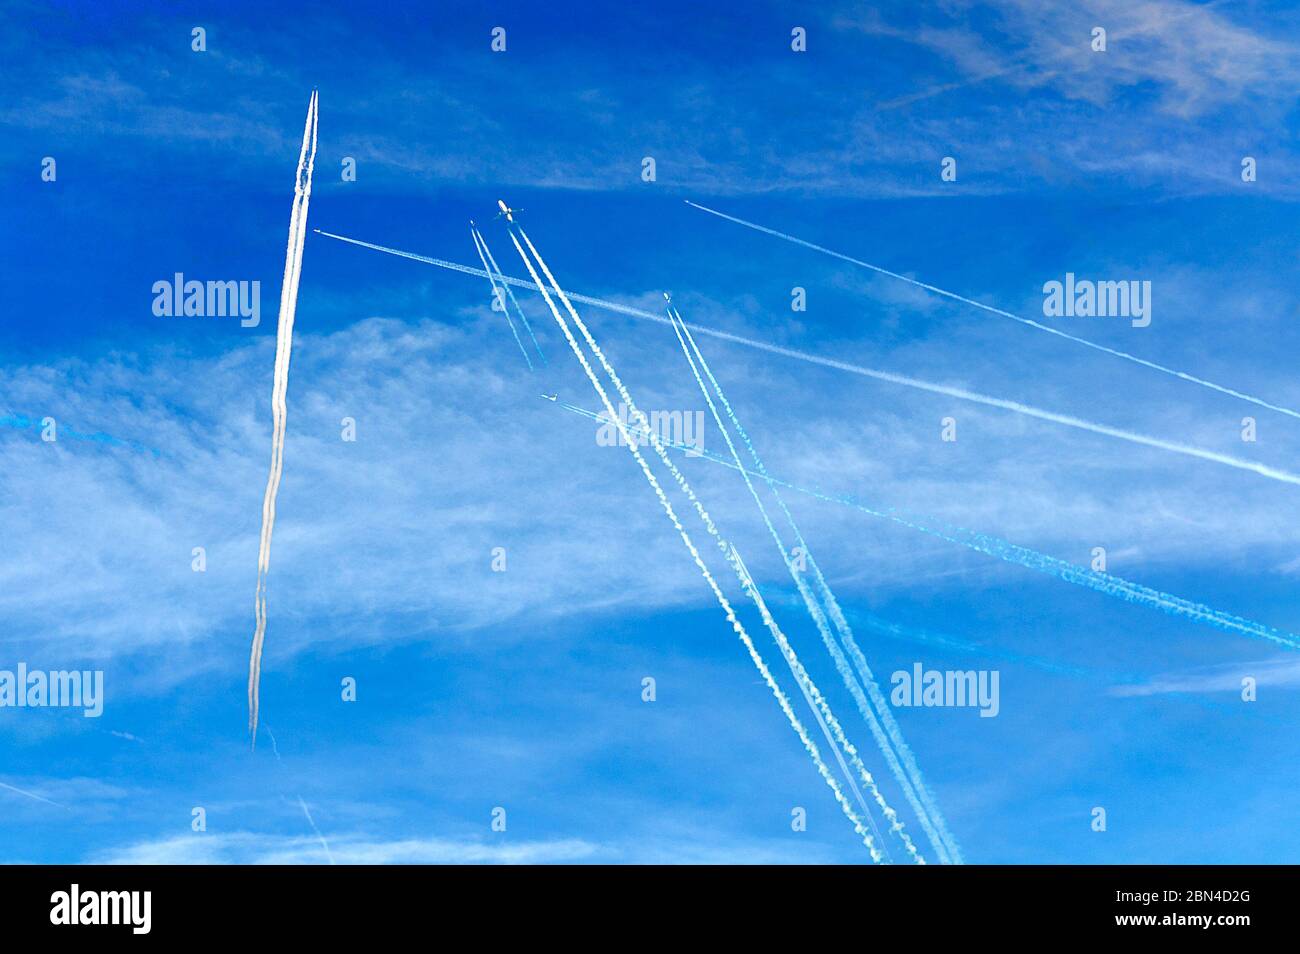 some crossing condensation trails of airplanes on the blue sky Stock Photo